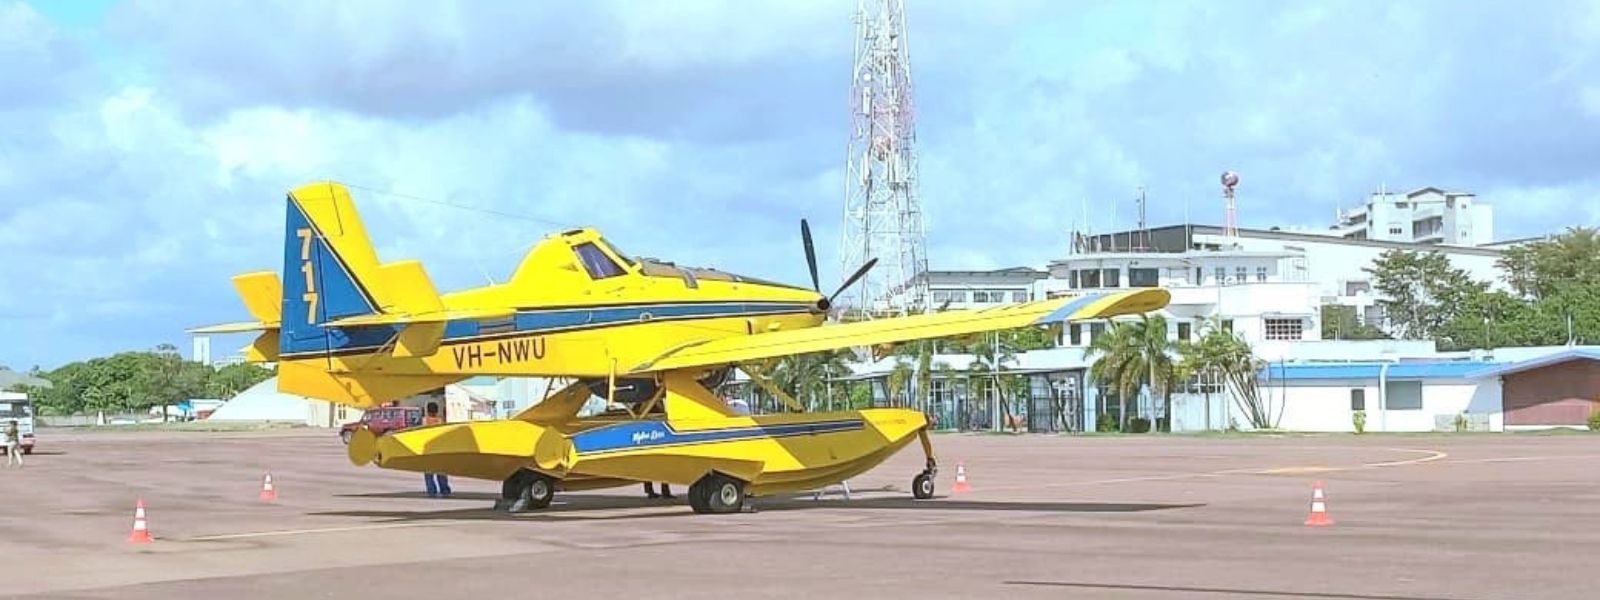 Air Tractors Land At Colombo Airport